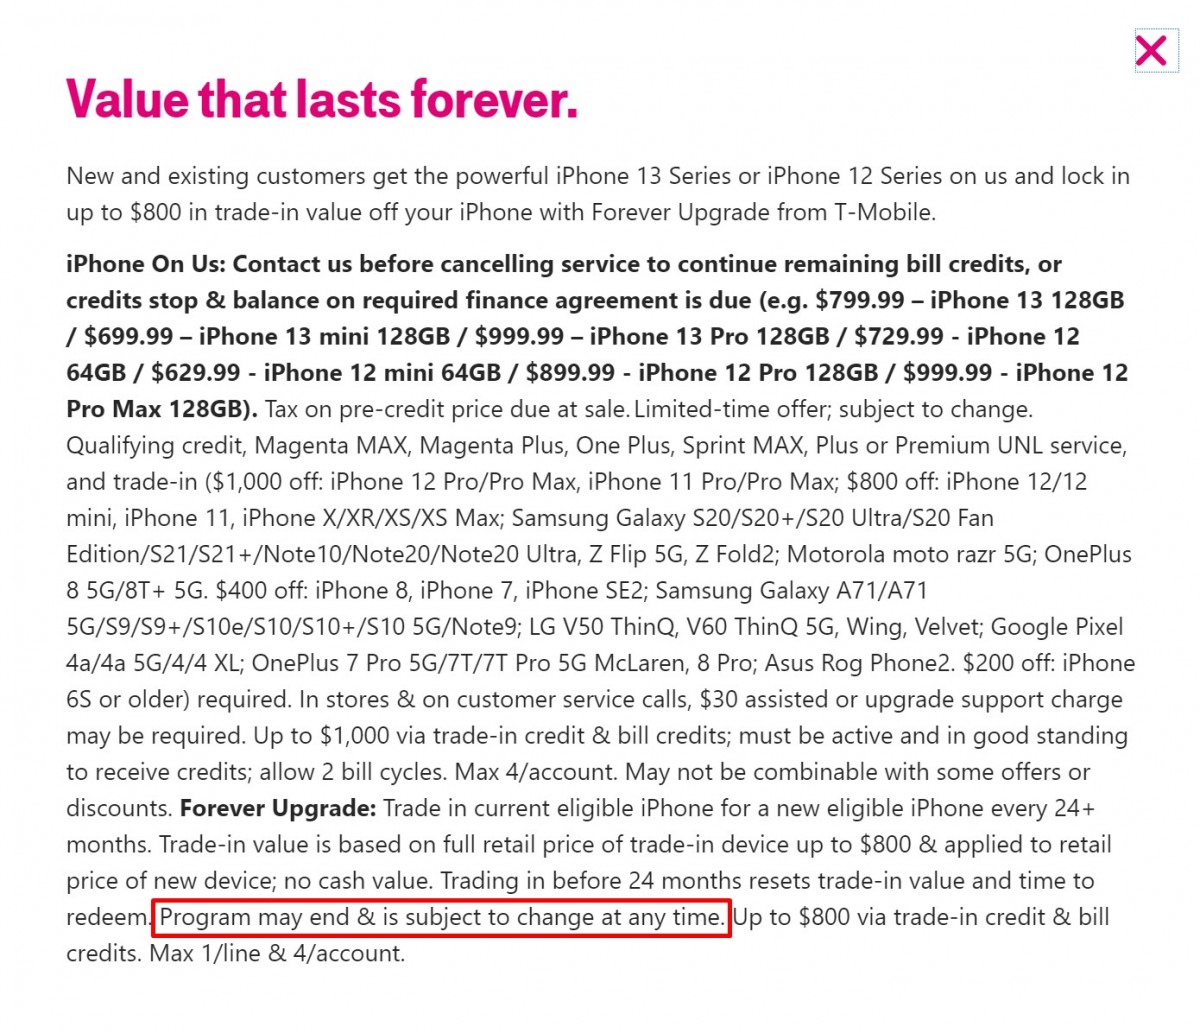 T-Mobile's new 'Forever Upgrade' program for the iPhone 13 isn't really forever.